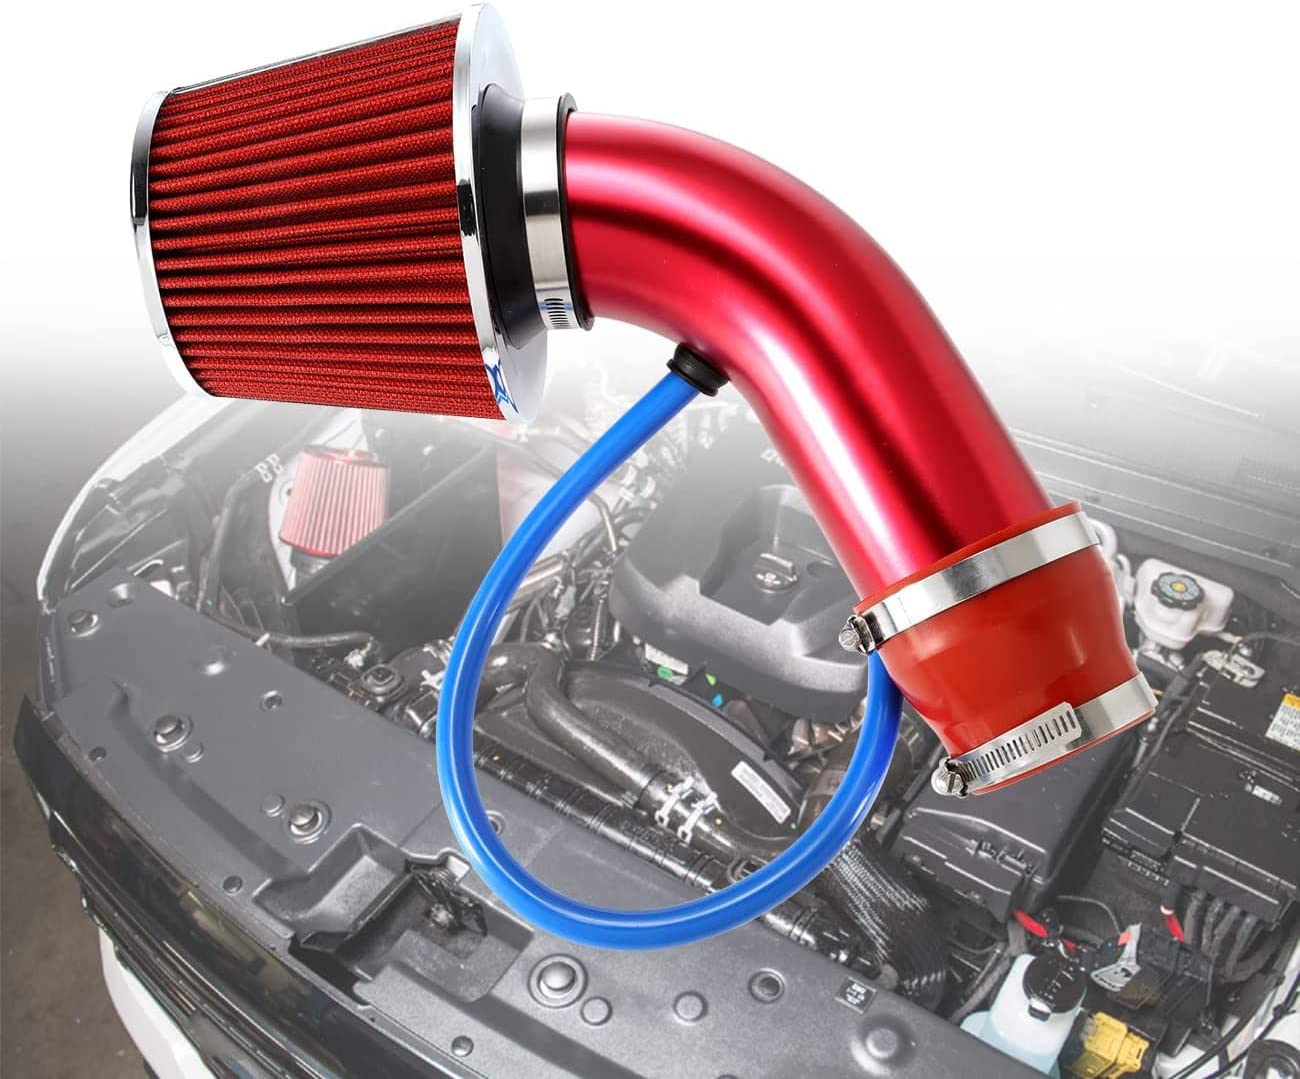 ALAVENTE Universal Car Cool Air Intake Kit 3 Inch Diameter Pipe Aluminium Automotive Filter Induction Low Hose and Clamp Kits - Red